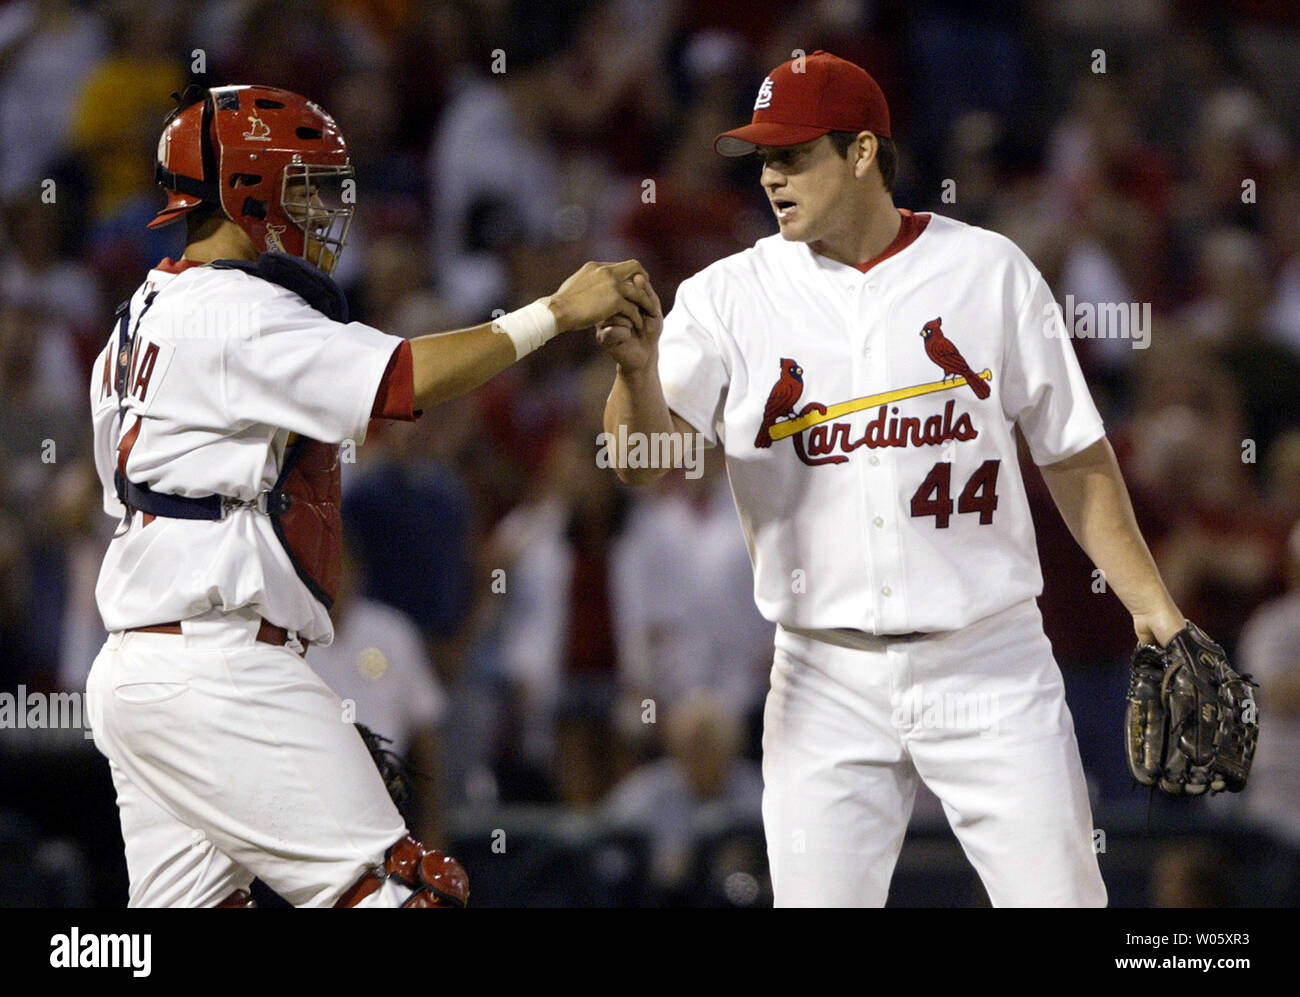 St. Louis Cardinals Jason Isringhausen (R) is congratulated by catcher Yadier  Molina after shutting down the Cincinnati Reds in the ninth inning for the  9-2 win at Busch Stadium in St. Louis